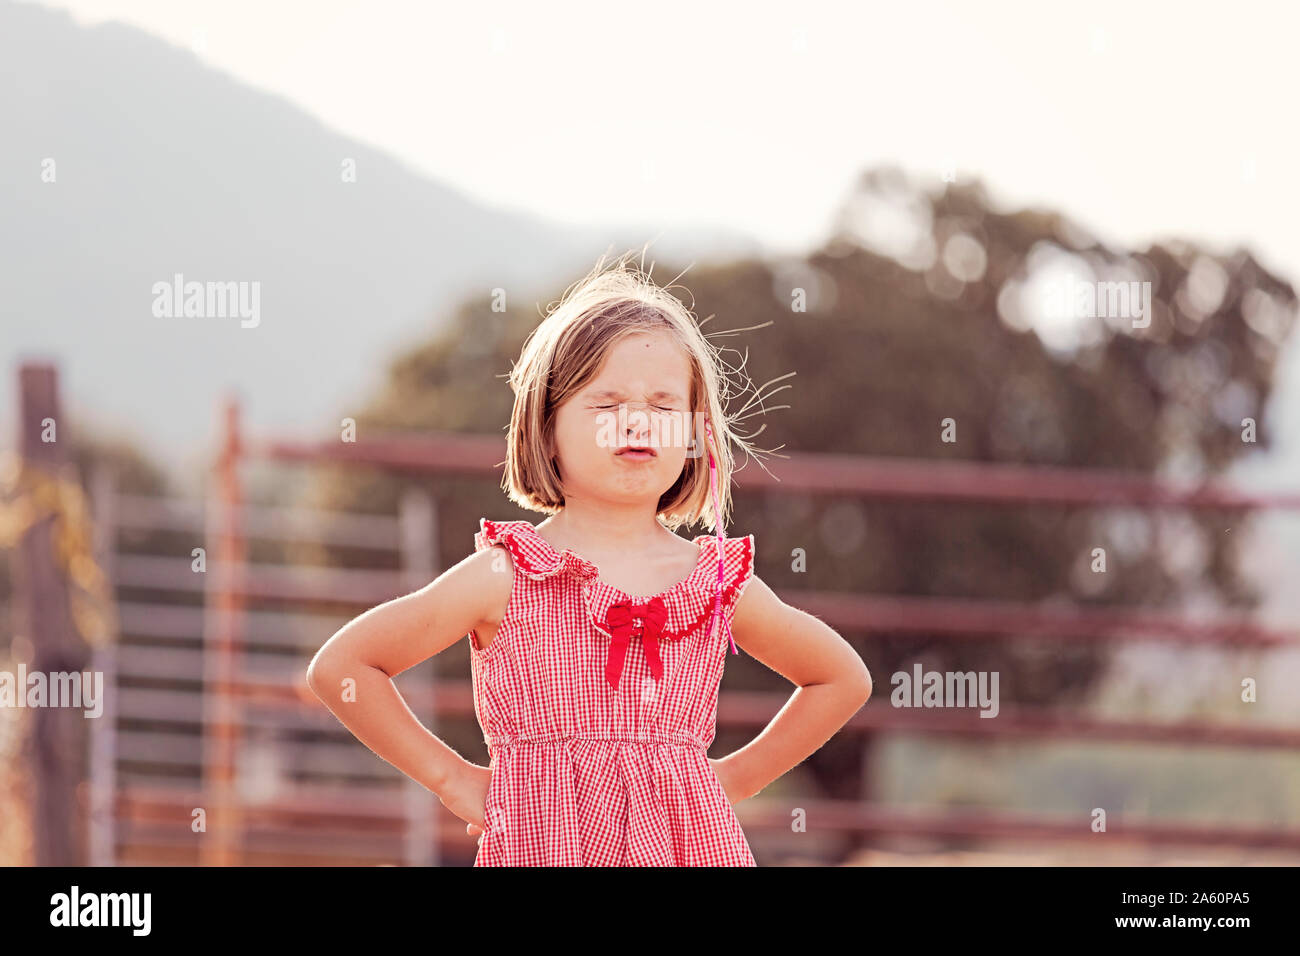 Portrait of little girl with eyes closed pouting mouth Stock Photo